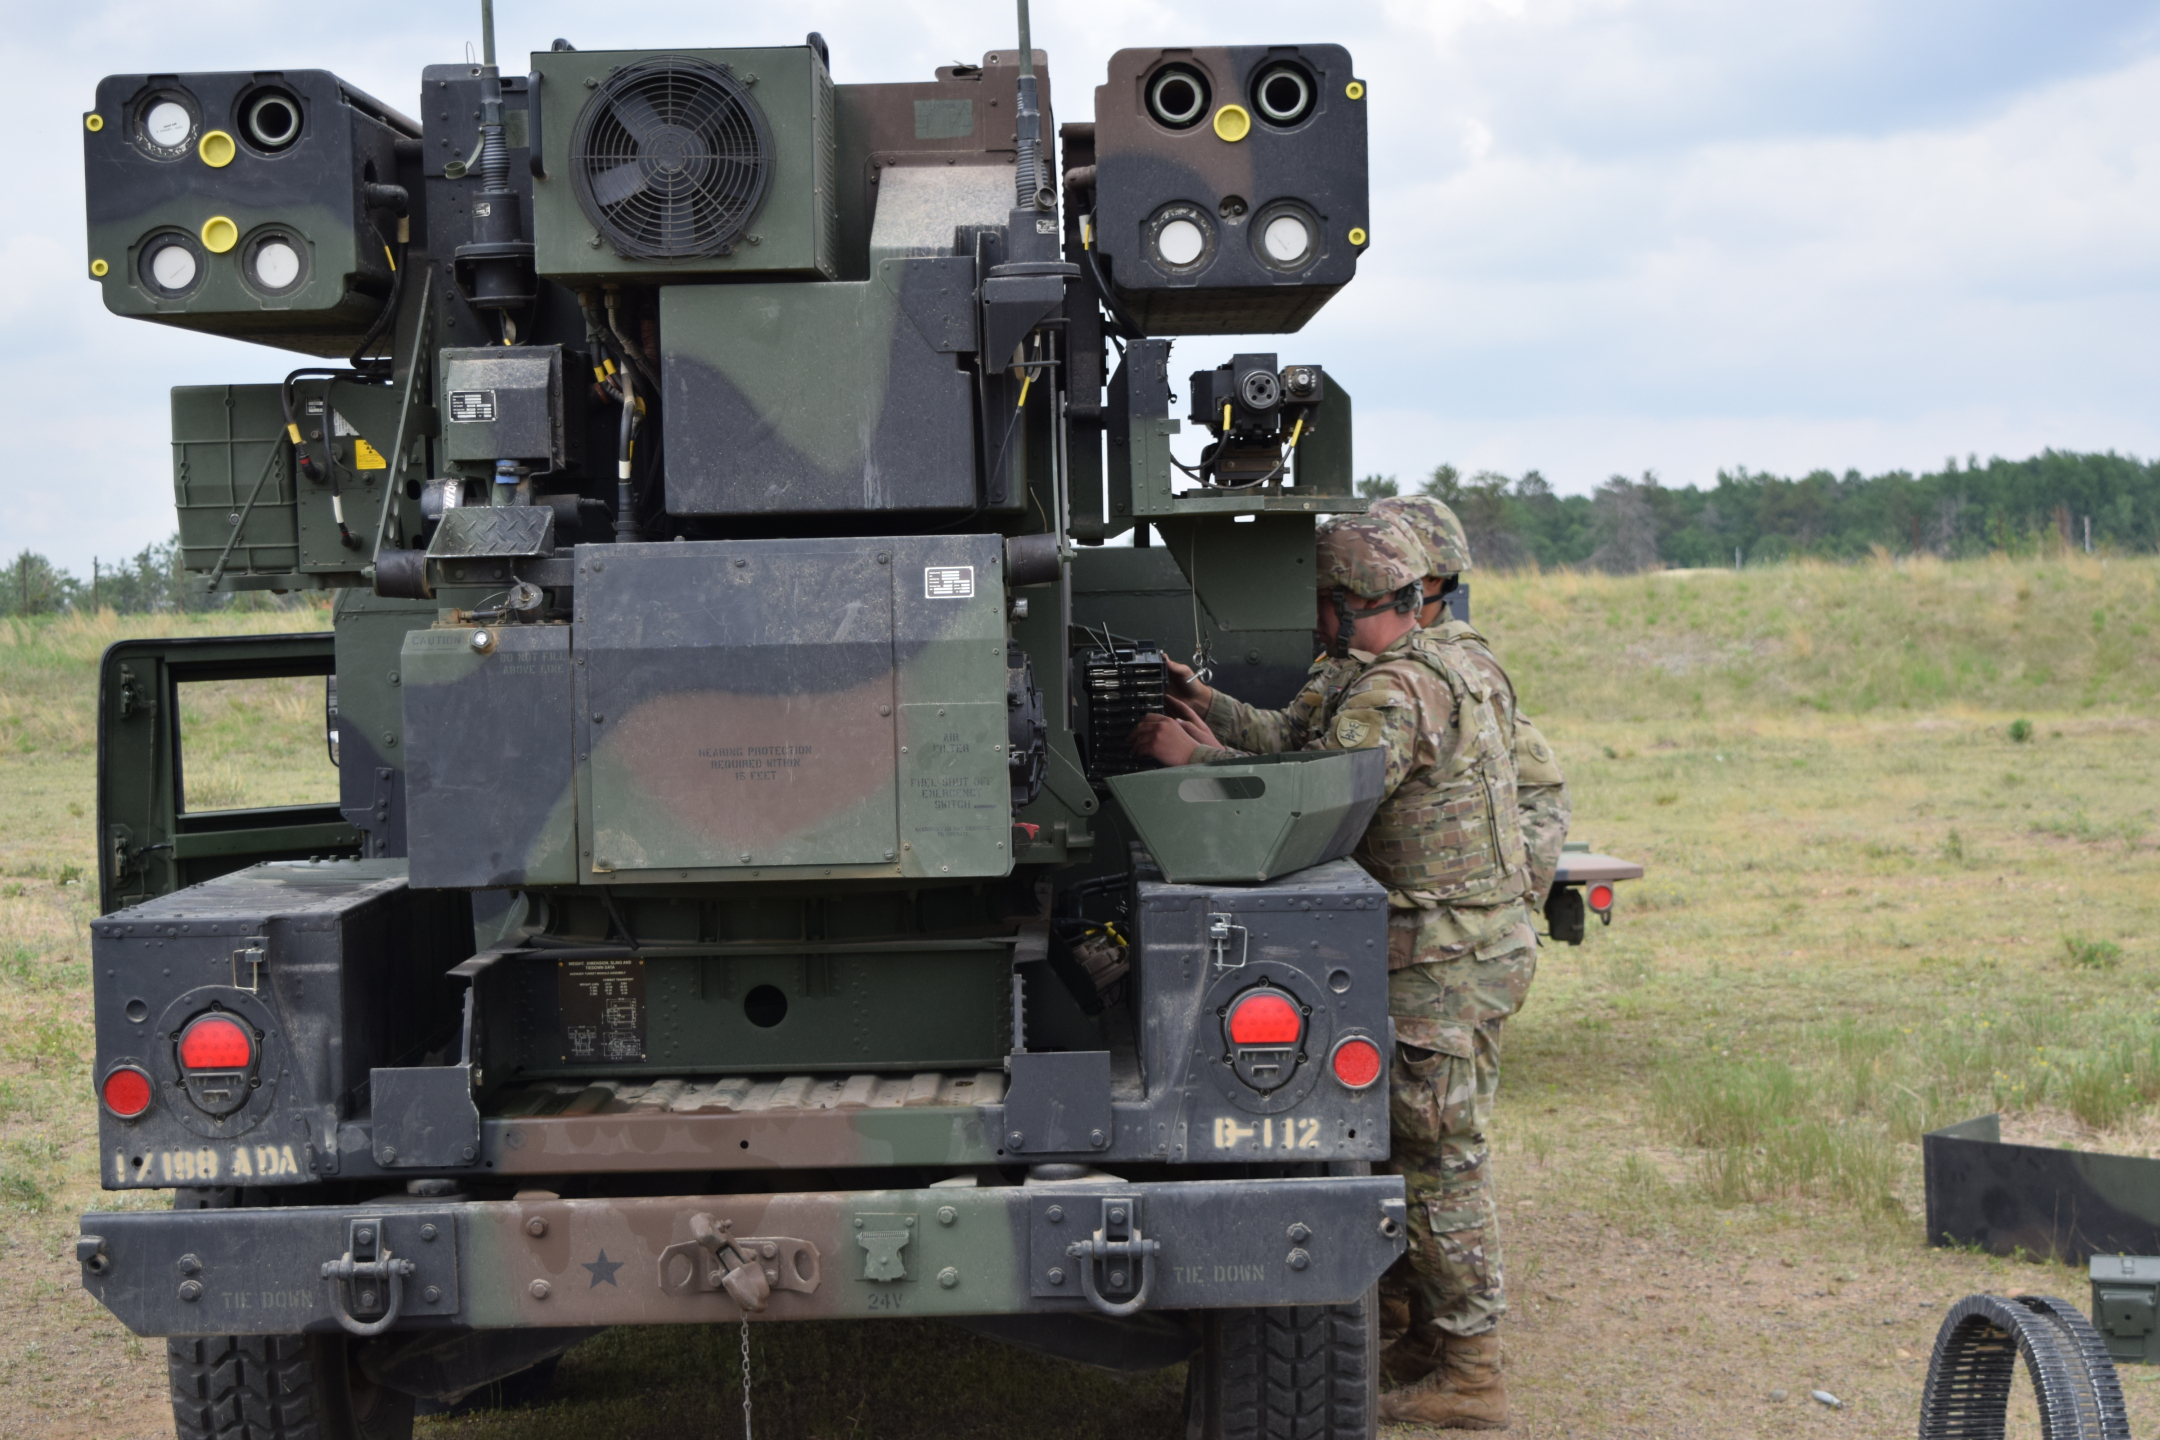 Soldiers of the 1-188th ADA preparing their Avengers for an exercise during annual training.